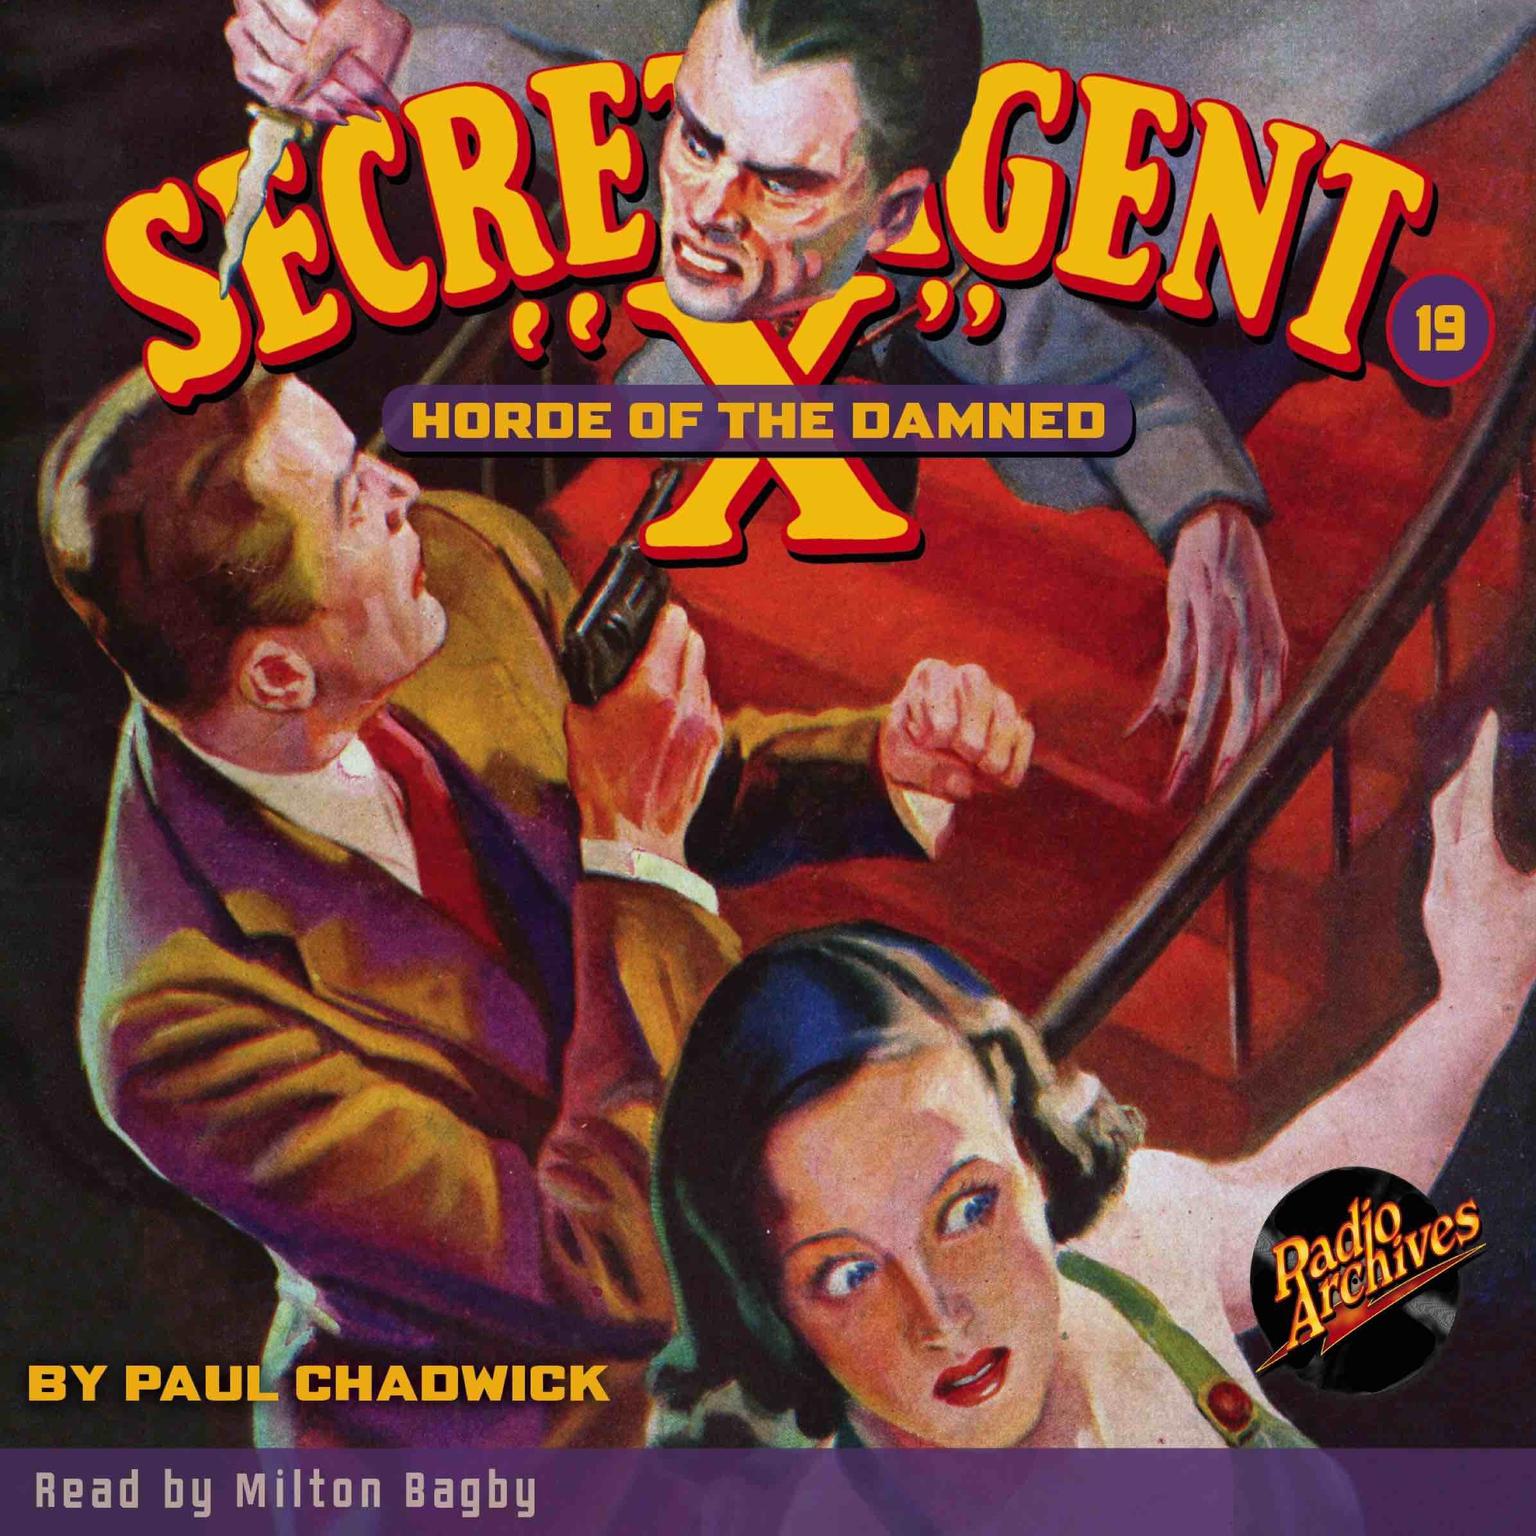 Secret Agent X: Horde of the Damned Audiobook, by Paul Chadwick